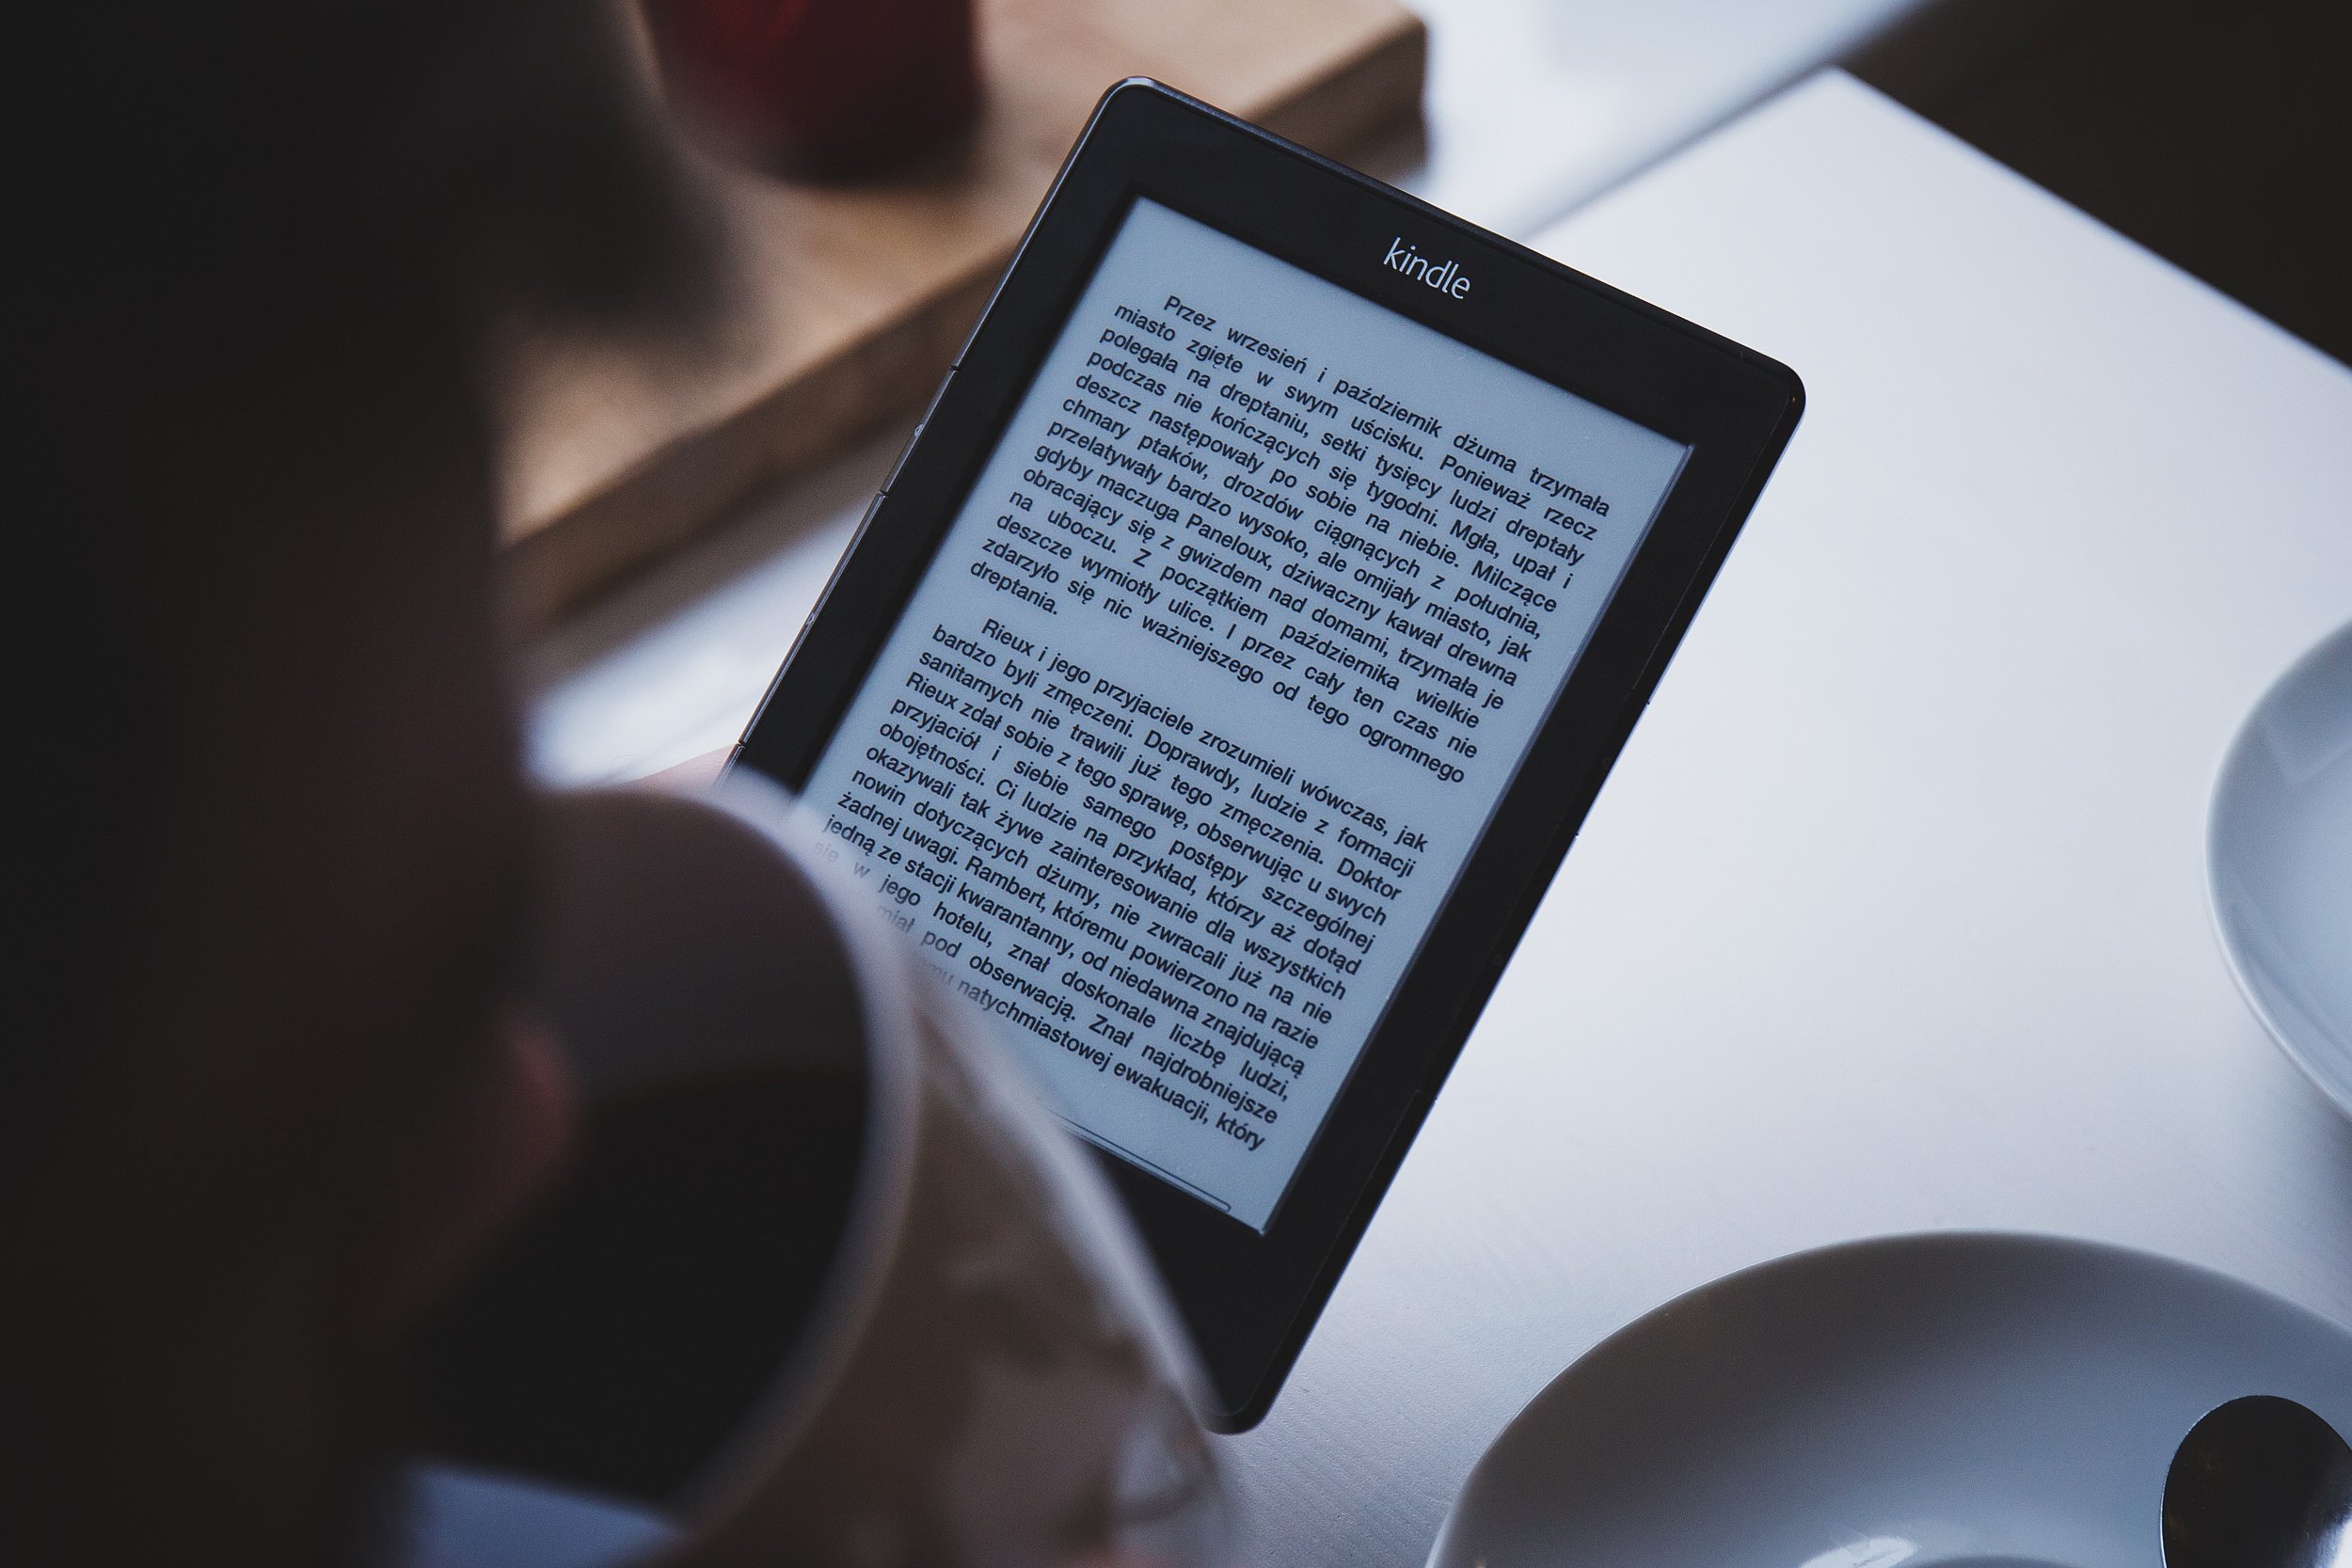 Great Stuff Your Kindle Day books, as recommended by  editors